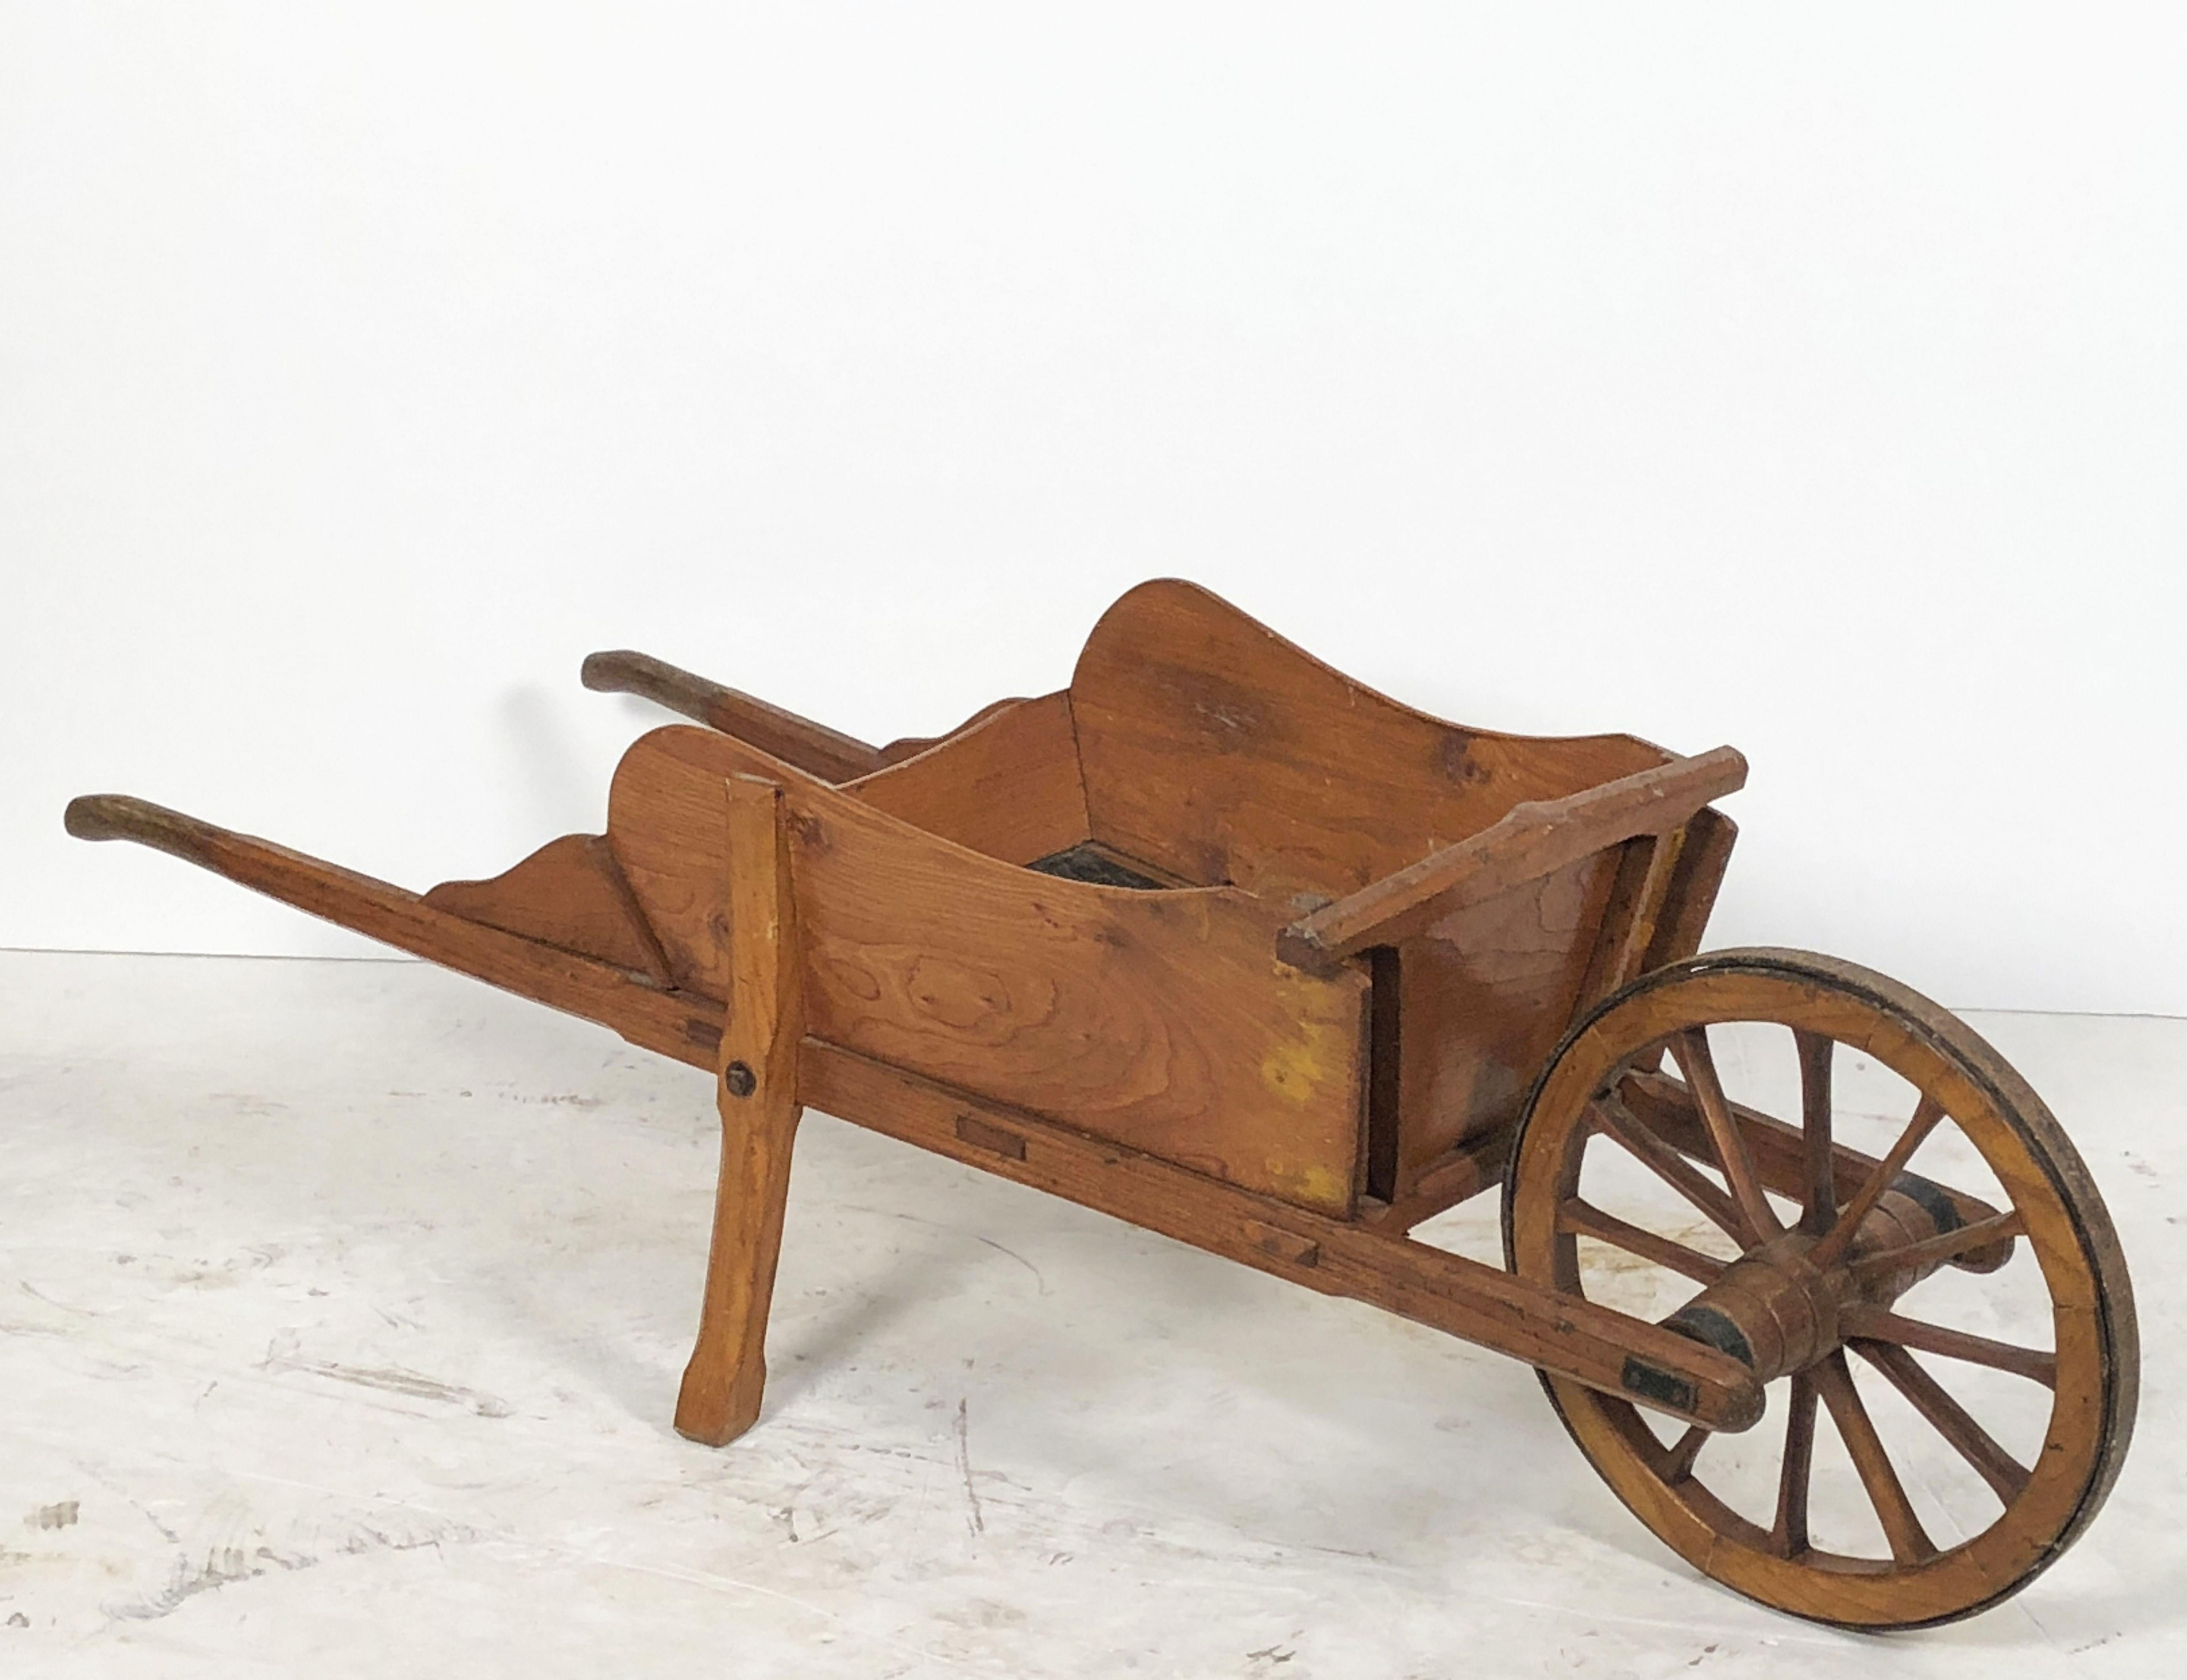 A small gardener's wheelbarrow from England - of finely-patinated wood with an iron-bound spoked wheel.

Perfect for displaying plants or as a decorative feature in a garden room or patio.